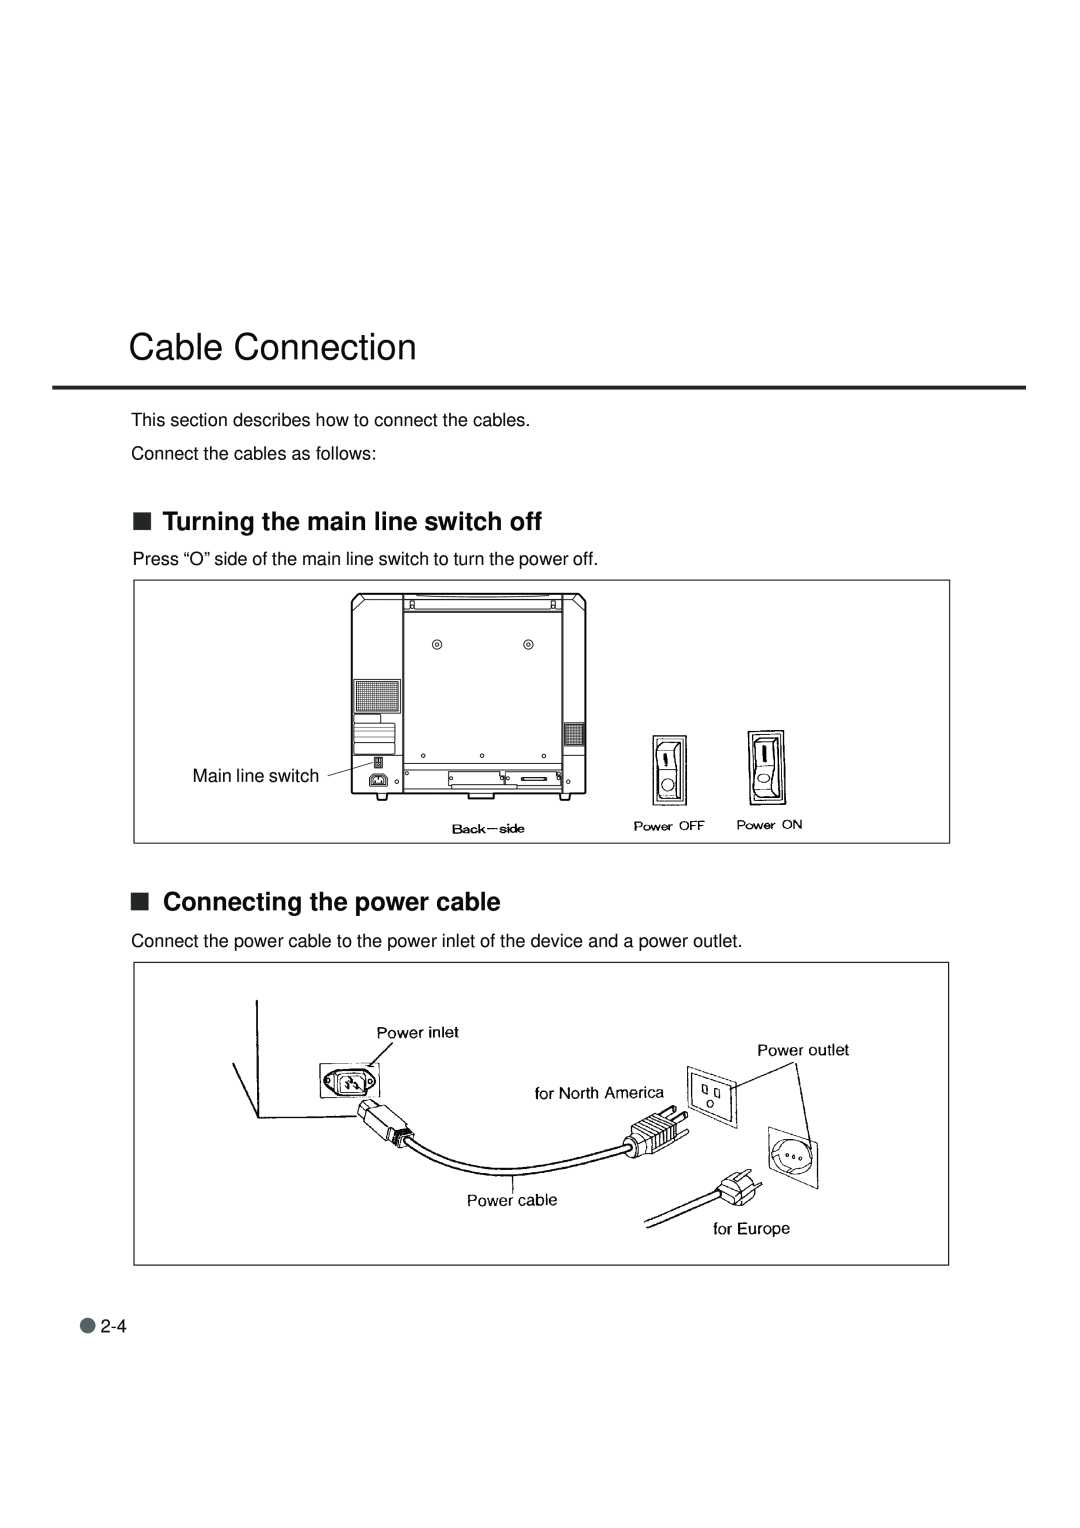 Fujitsu fi-4990C manual Cable Connection, Turning the main line switch off, Connecting the power cable 